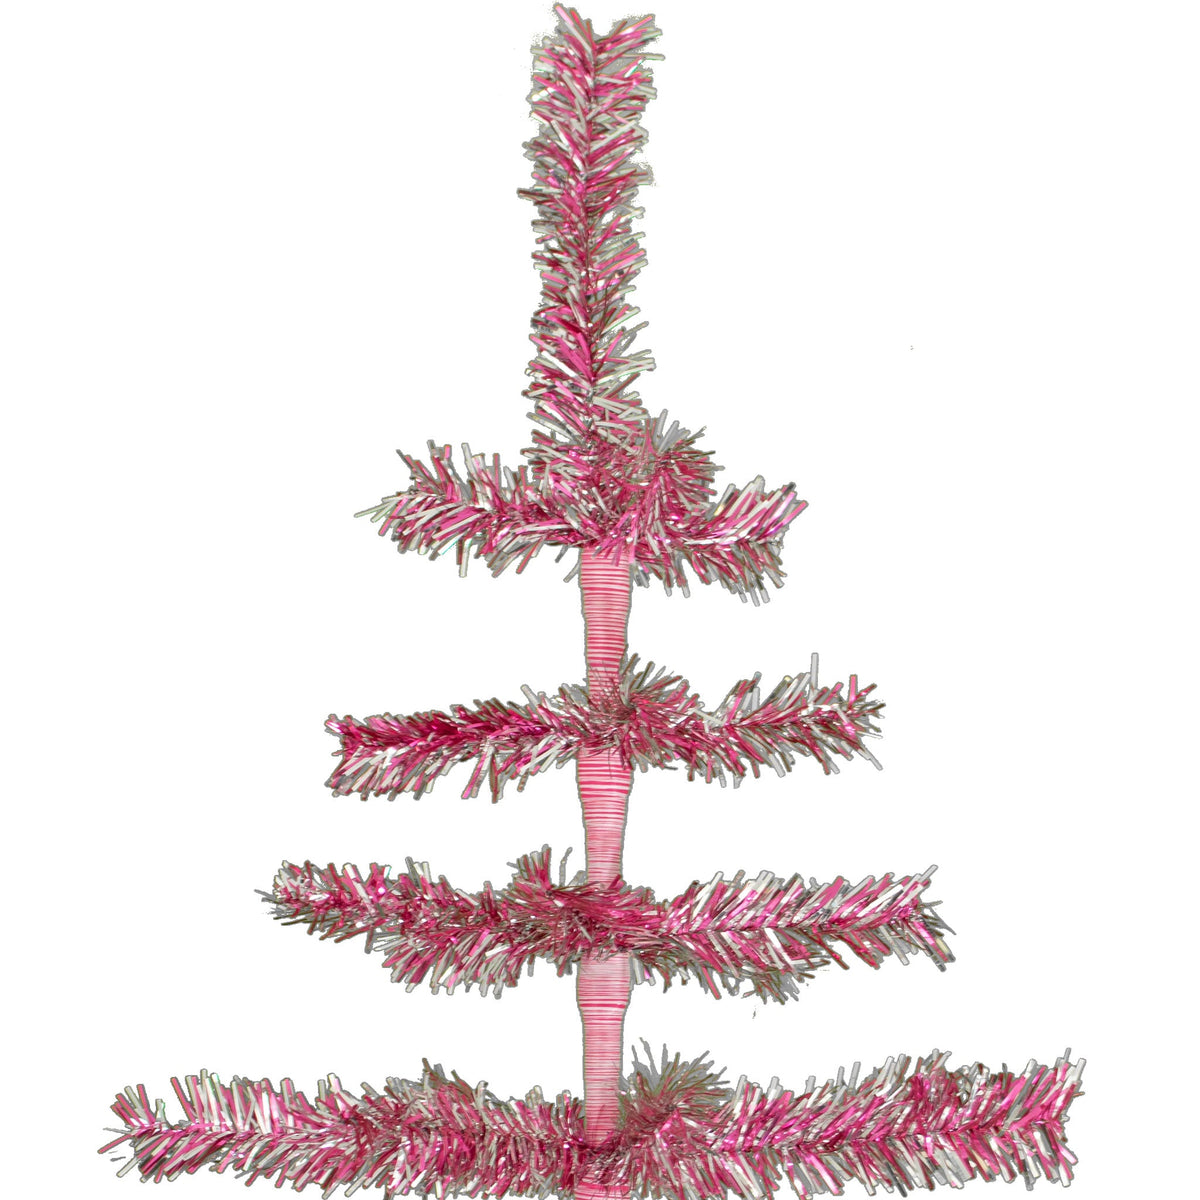 Embrace the spirit of Christmas nostalgia and make memories to last a lifetime with our Limited Edition Pink & Silver Vintage Tinsel Christmas Tree.  Don't miss your chance to own a piece of holiday history – shop now before they're gone for good.